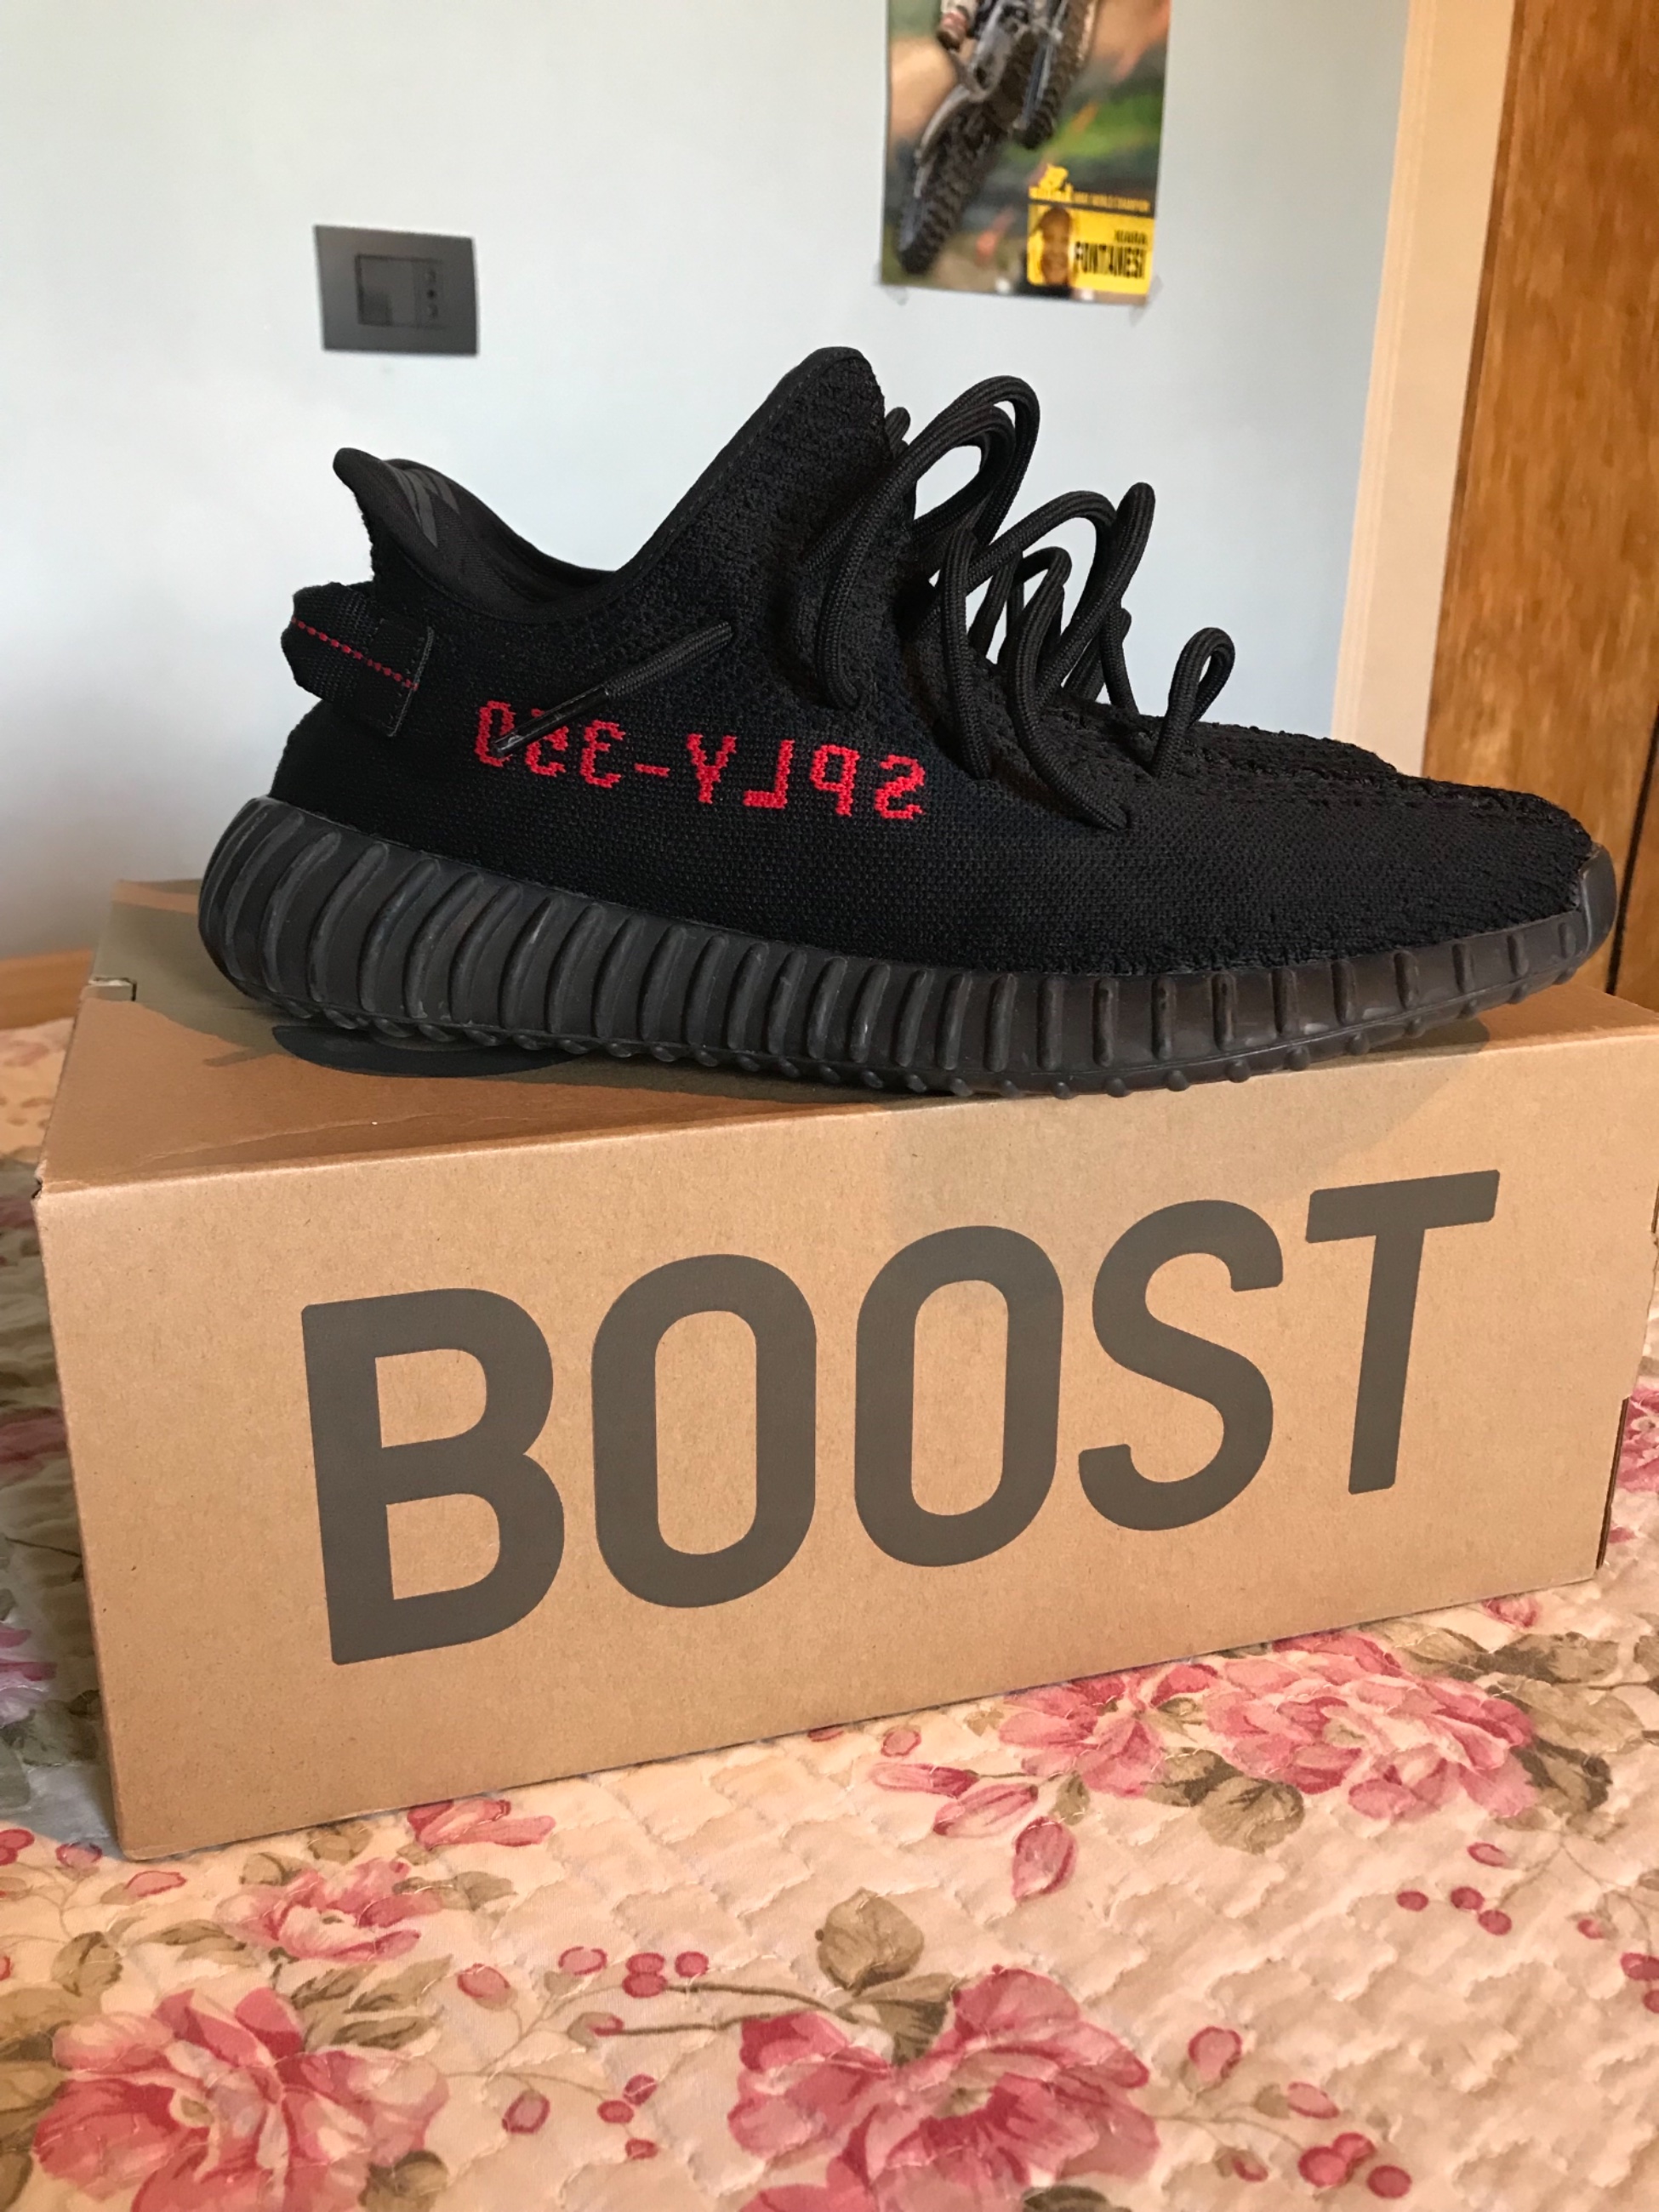 Cheap Yeezy 350 Boost V2 Shoes Aaa Quality016